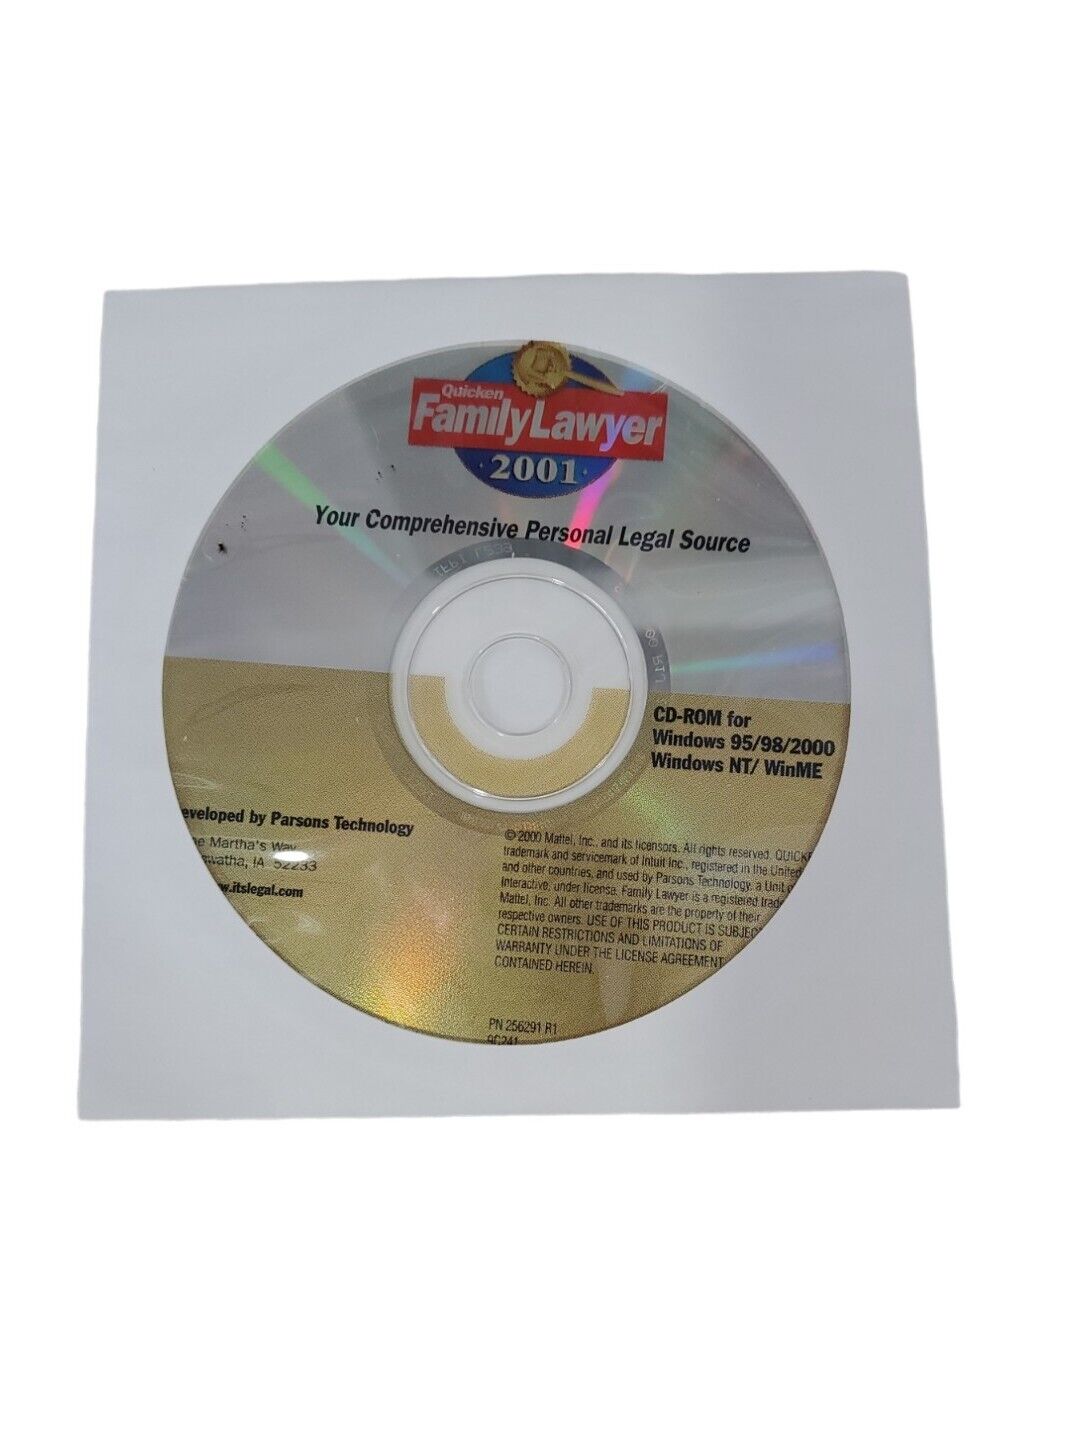 NEW Quicken Family Lawyer 2001 CD Rom Windows Suite CD-ROM